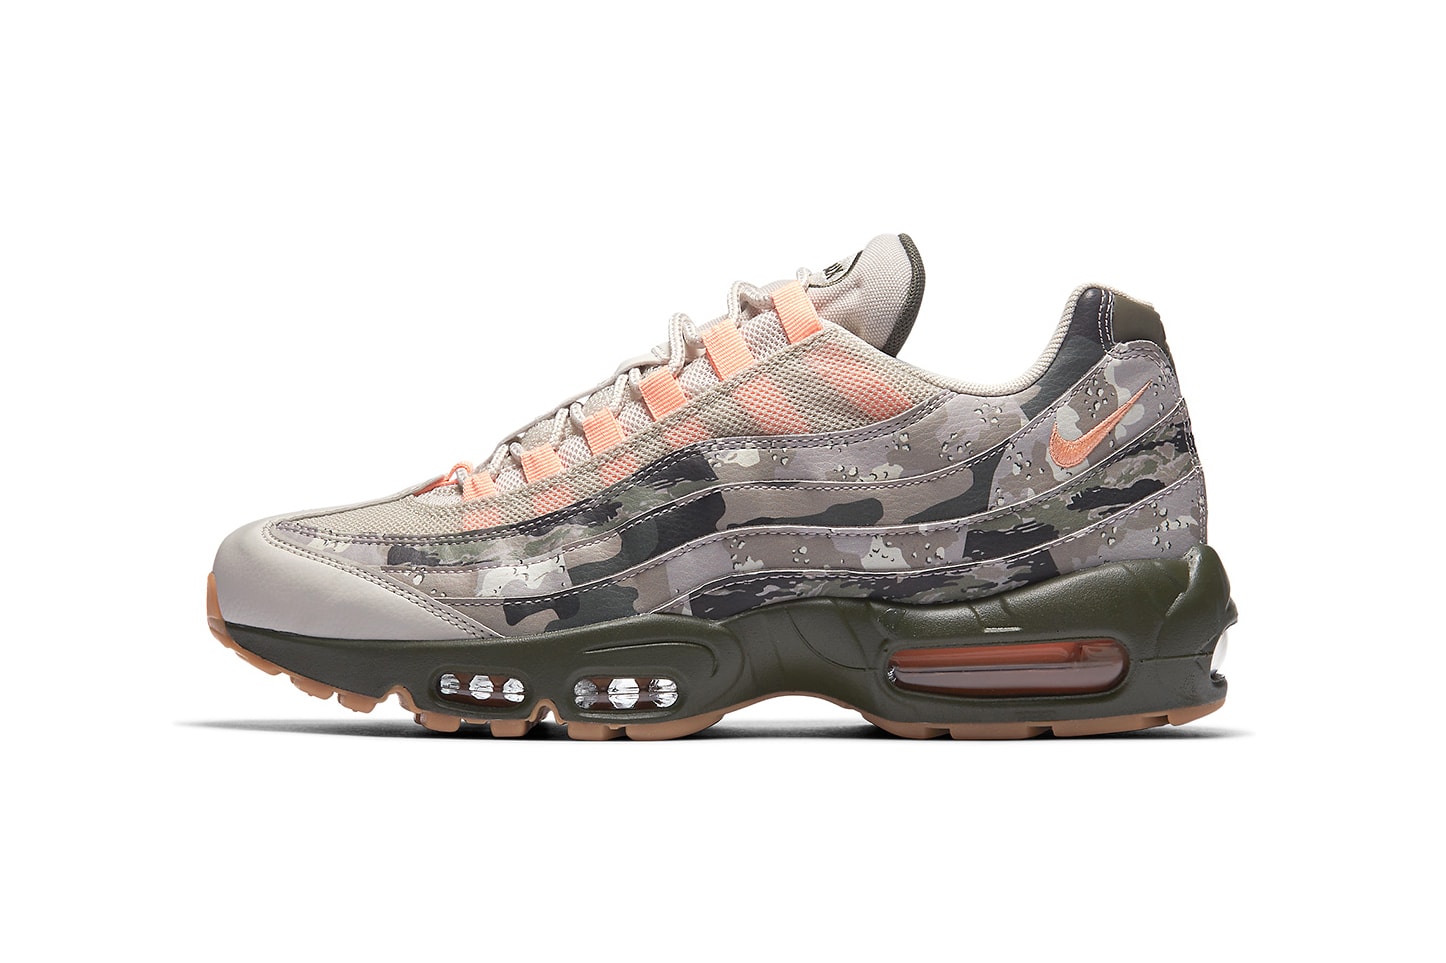 Nike Air Max 95 Camo camouflage march 2018 spring summer release date info drop sneakers shoes footwear AQ6303 001